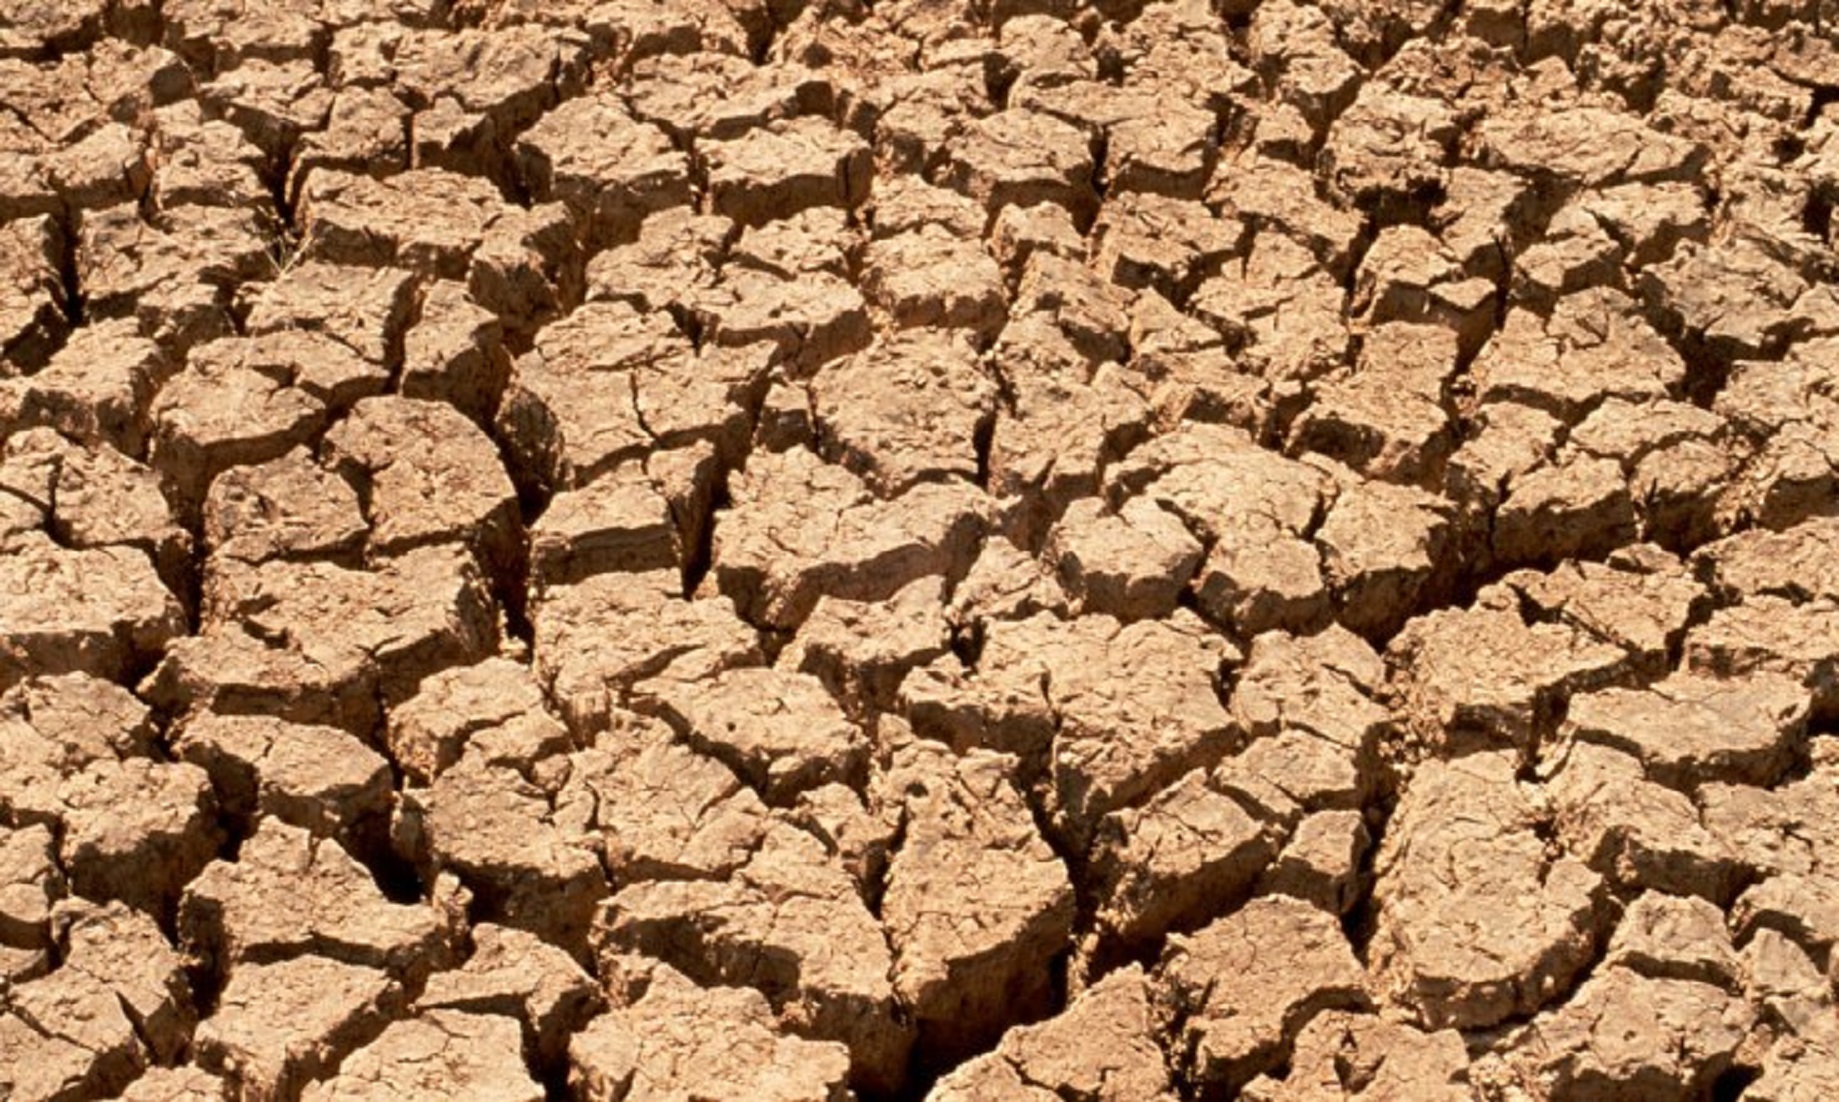 Namibia: Over 30,000 drought-related cattle deaths recorded in seven months